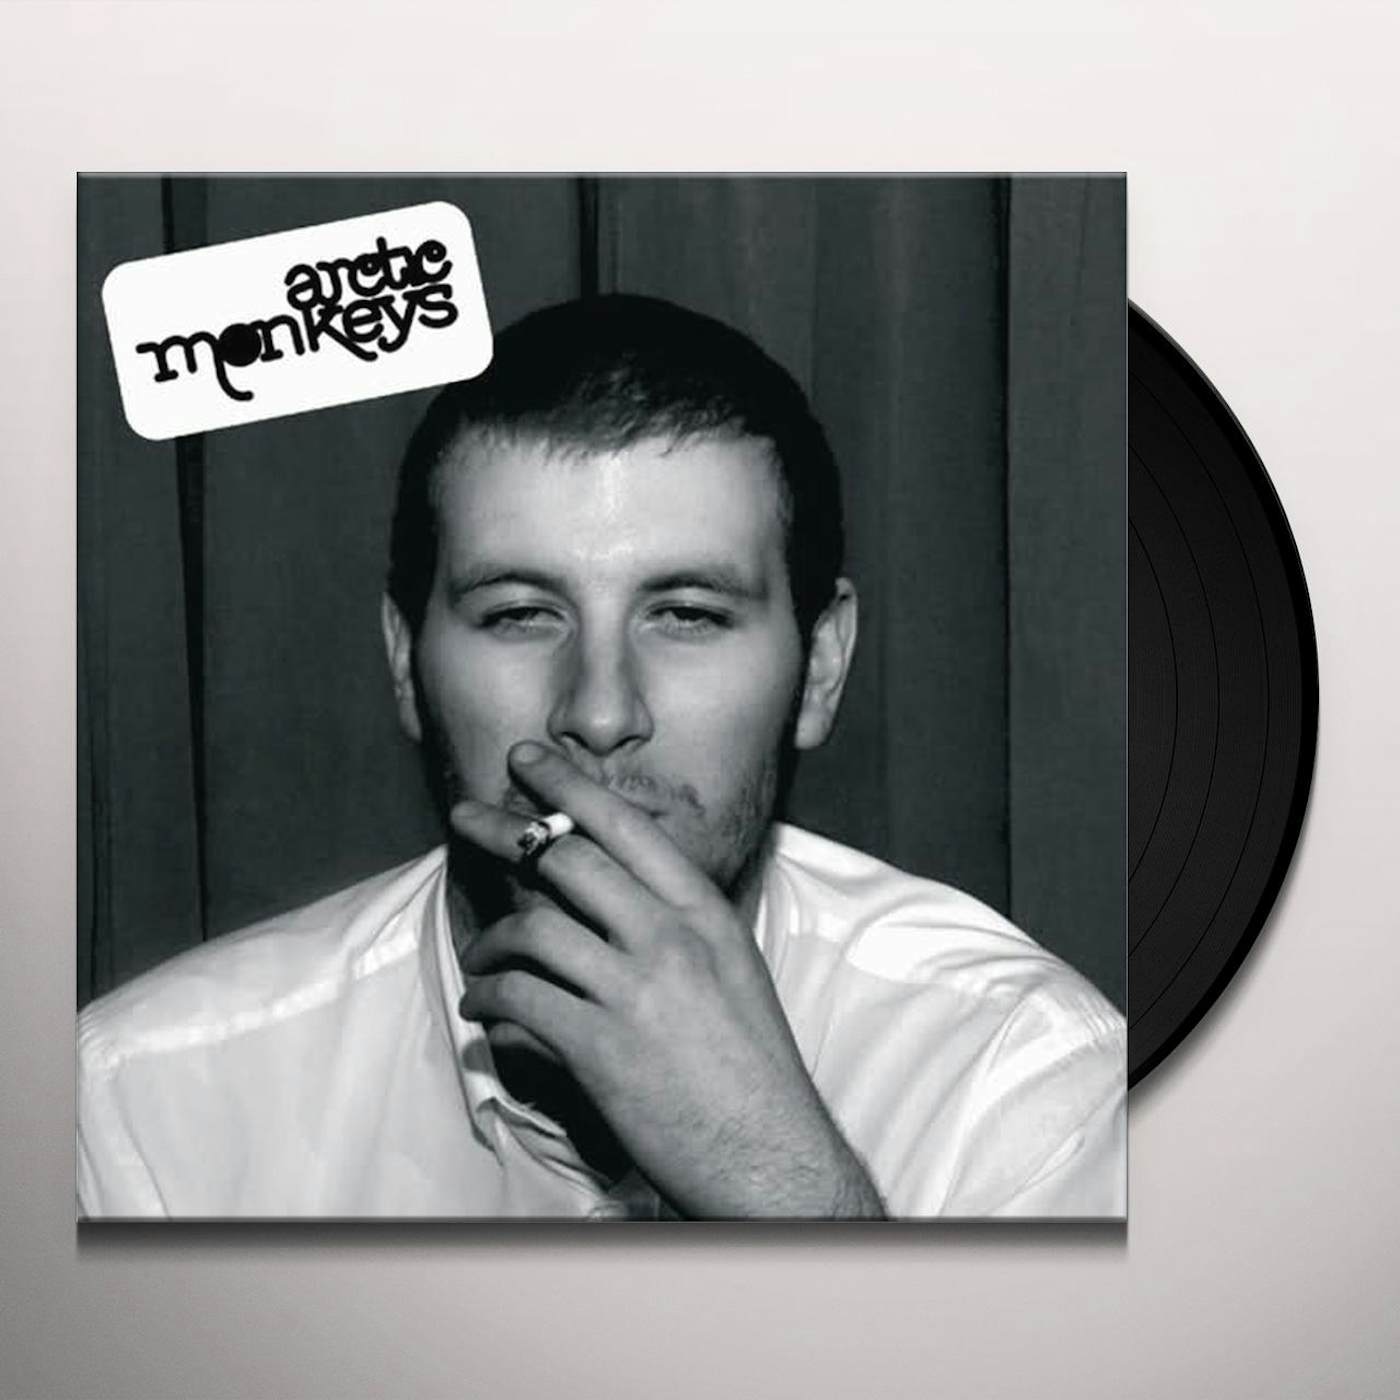 Arctic Monkeys WHATEVER PEOPLE SAY I AM THAT'S WHAT I AM NOT Vinyl Record